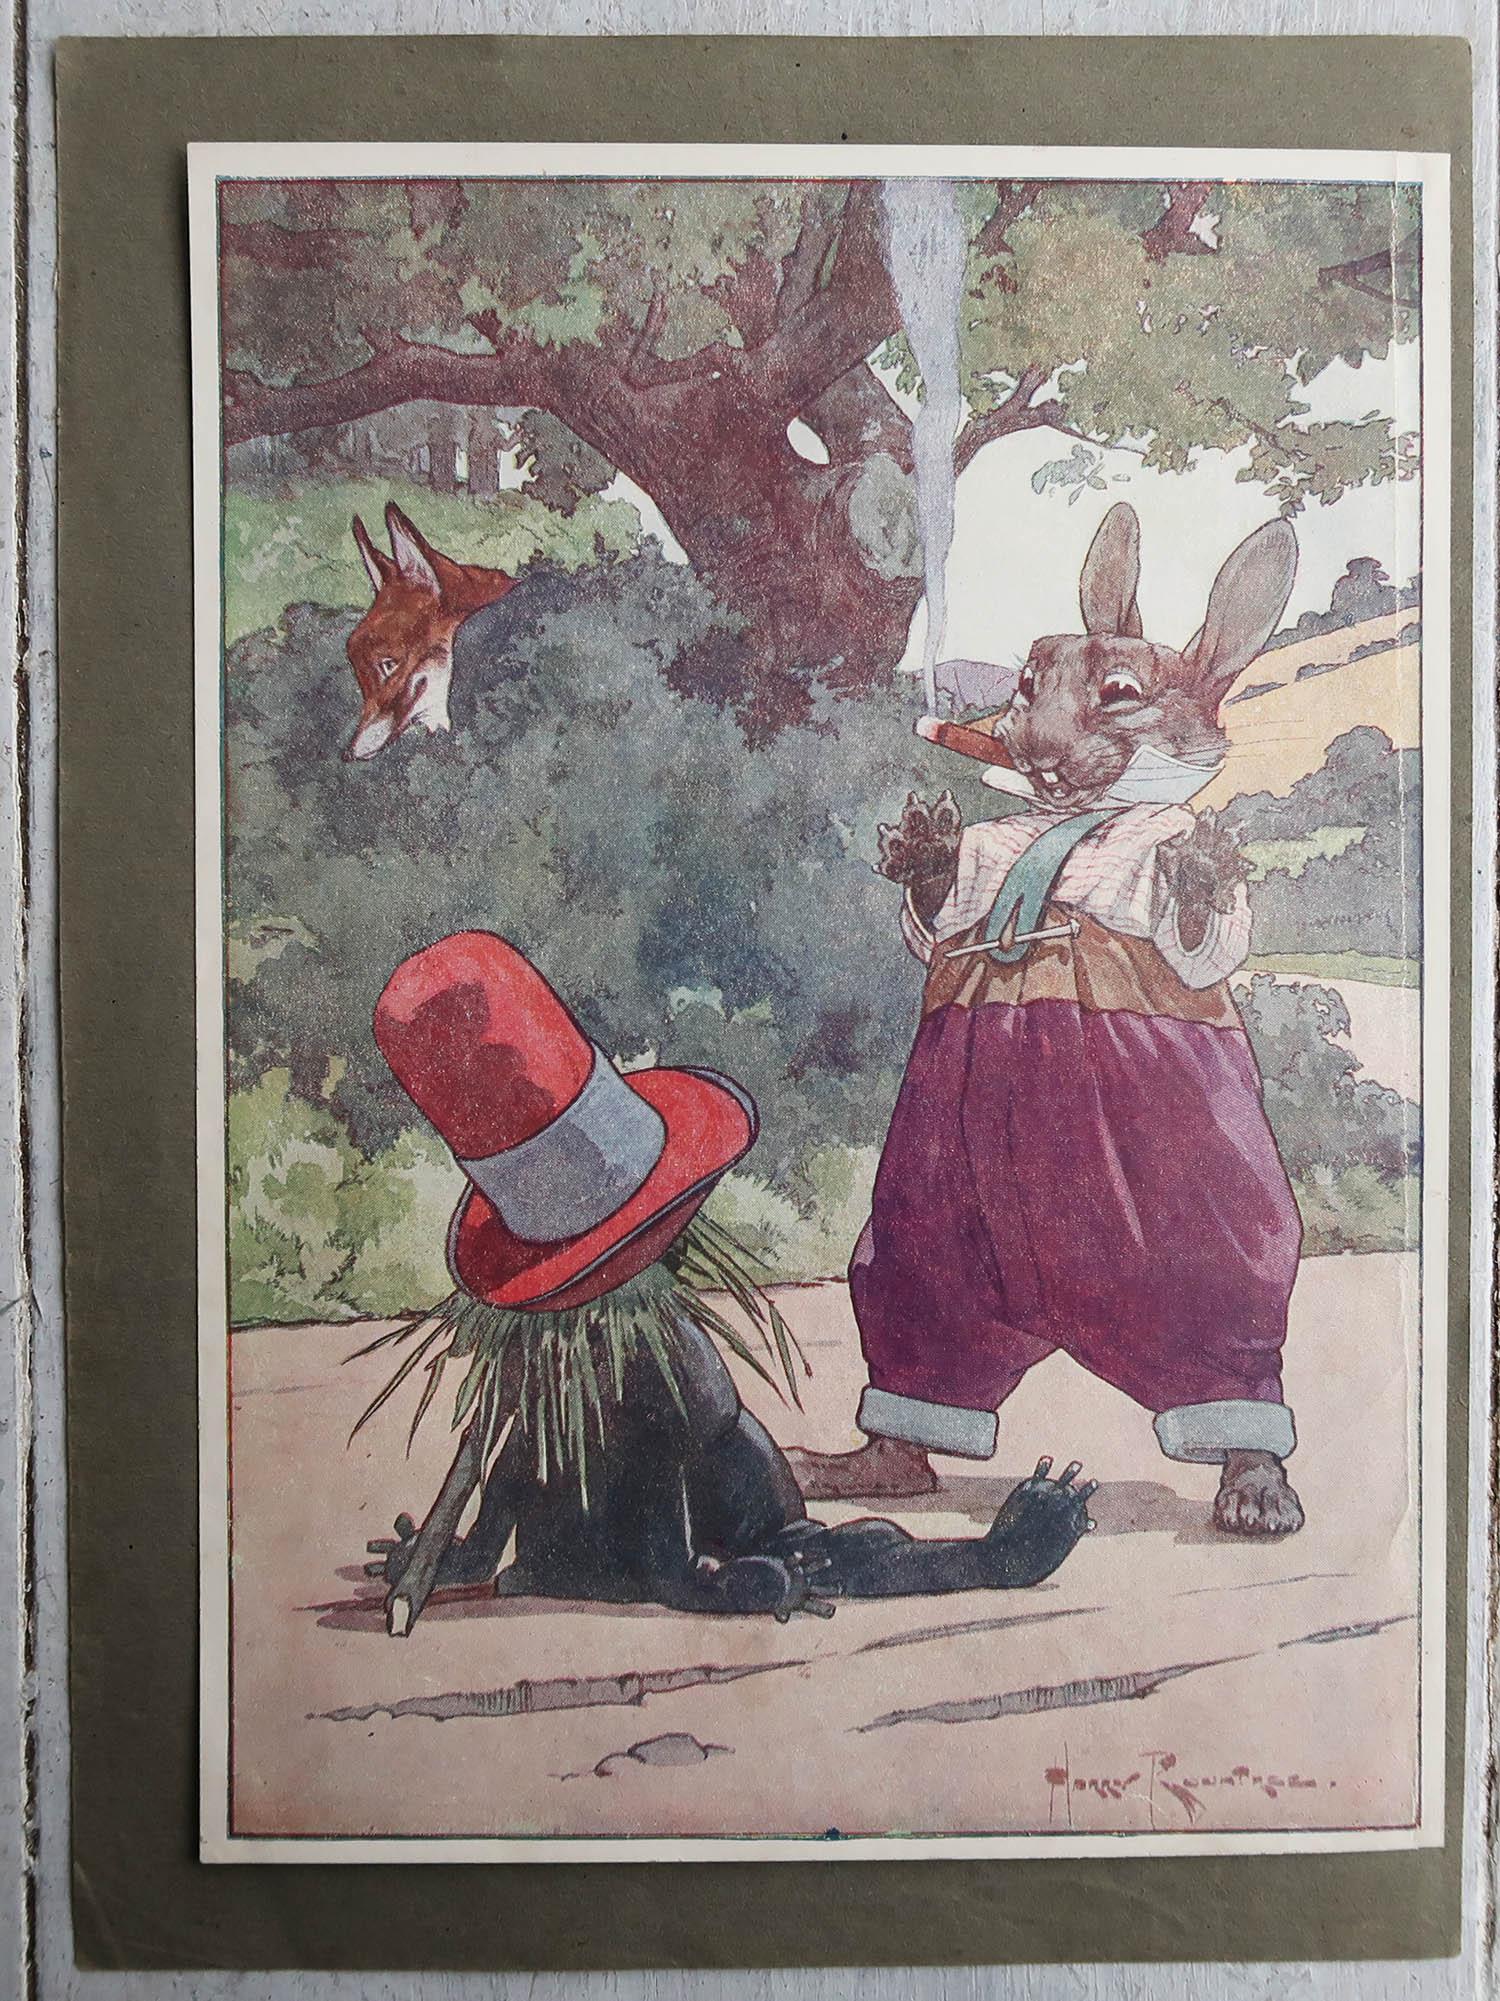 Other Original Vintage Print After Harry Rountree. C.1910 For Sale